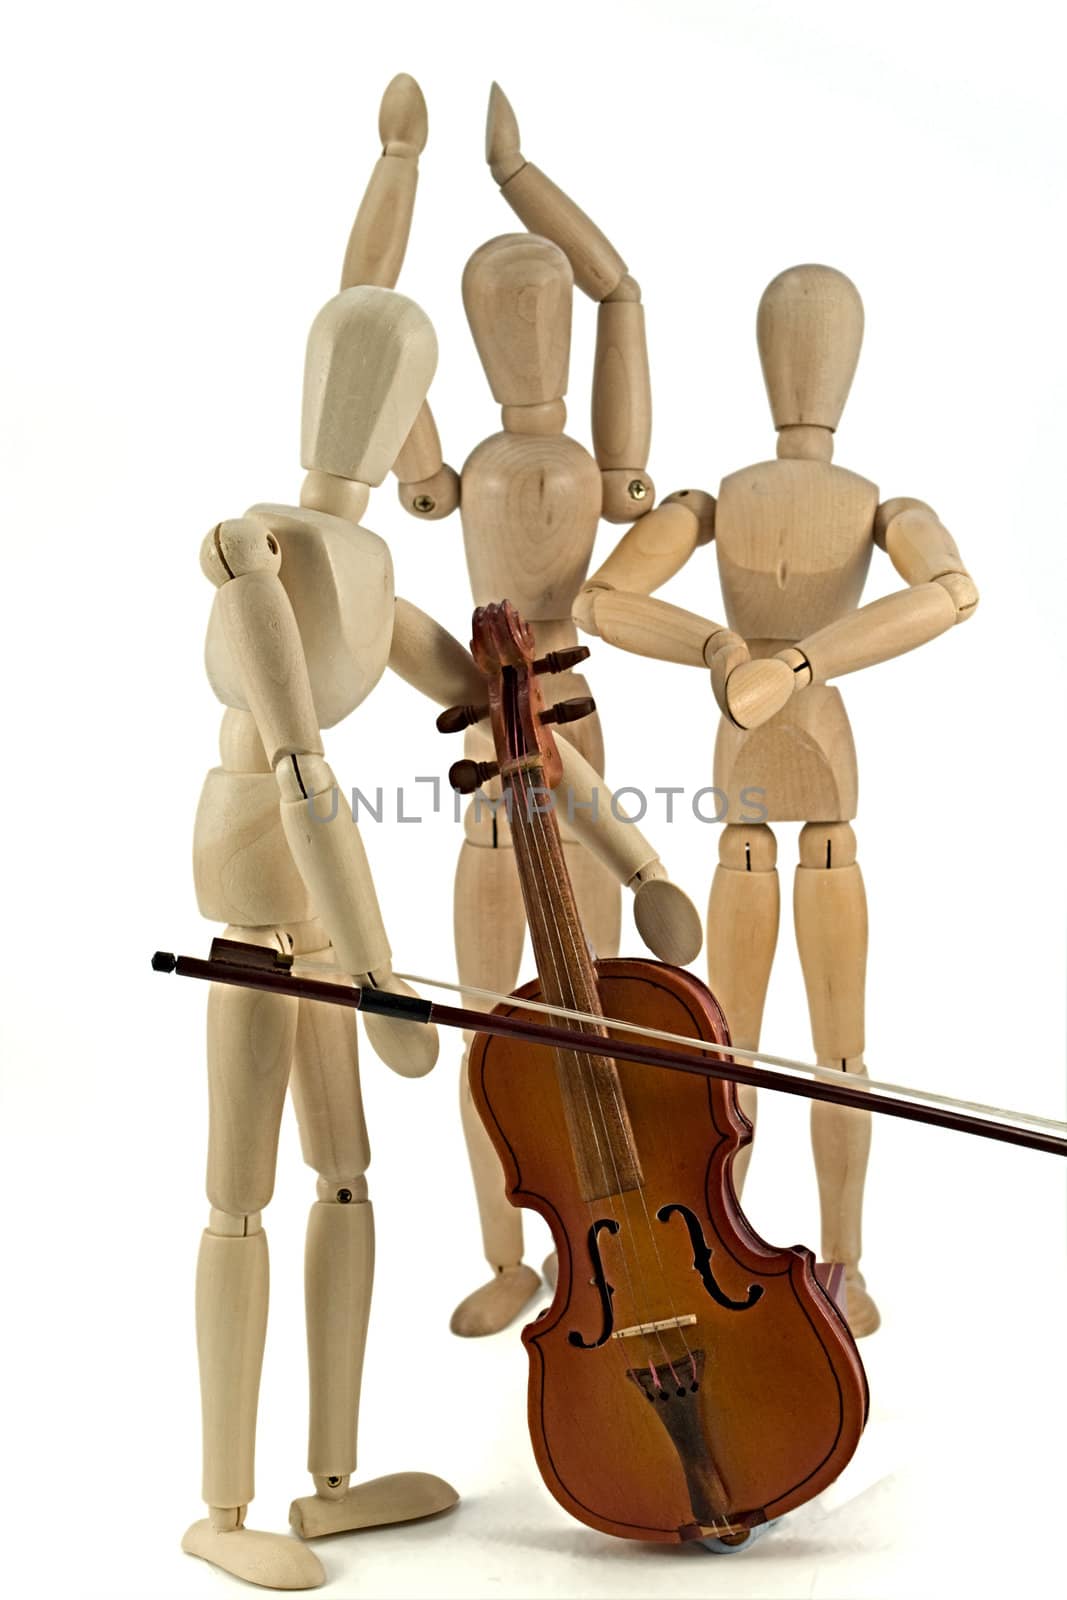 A wooden mannequin playing the violin.